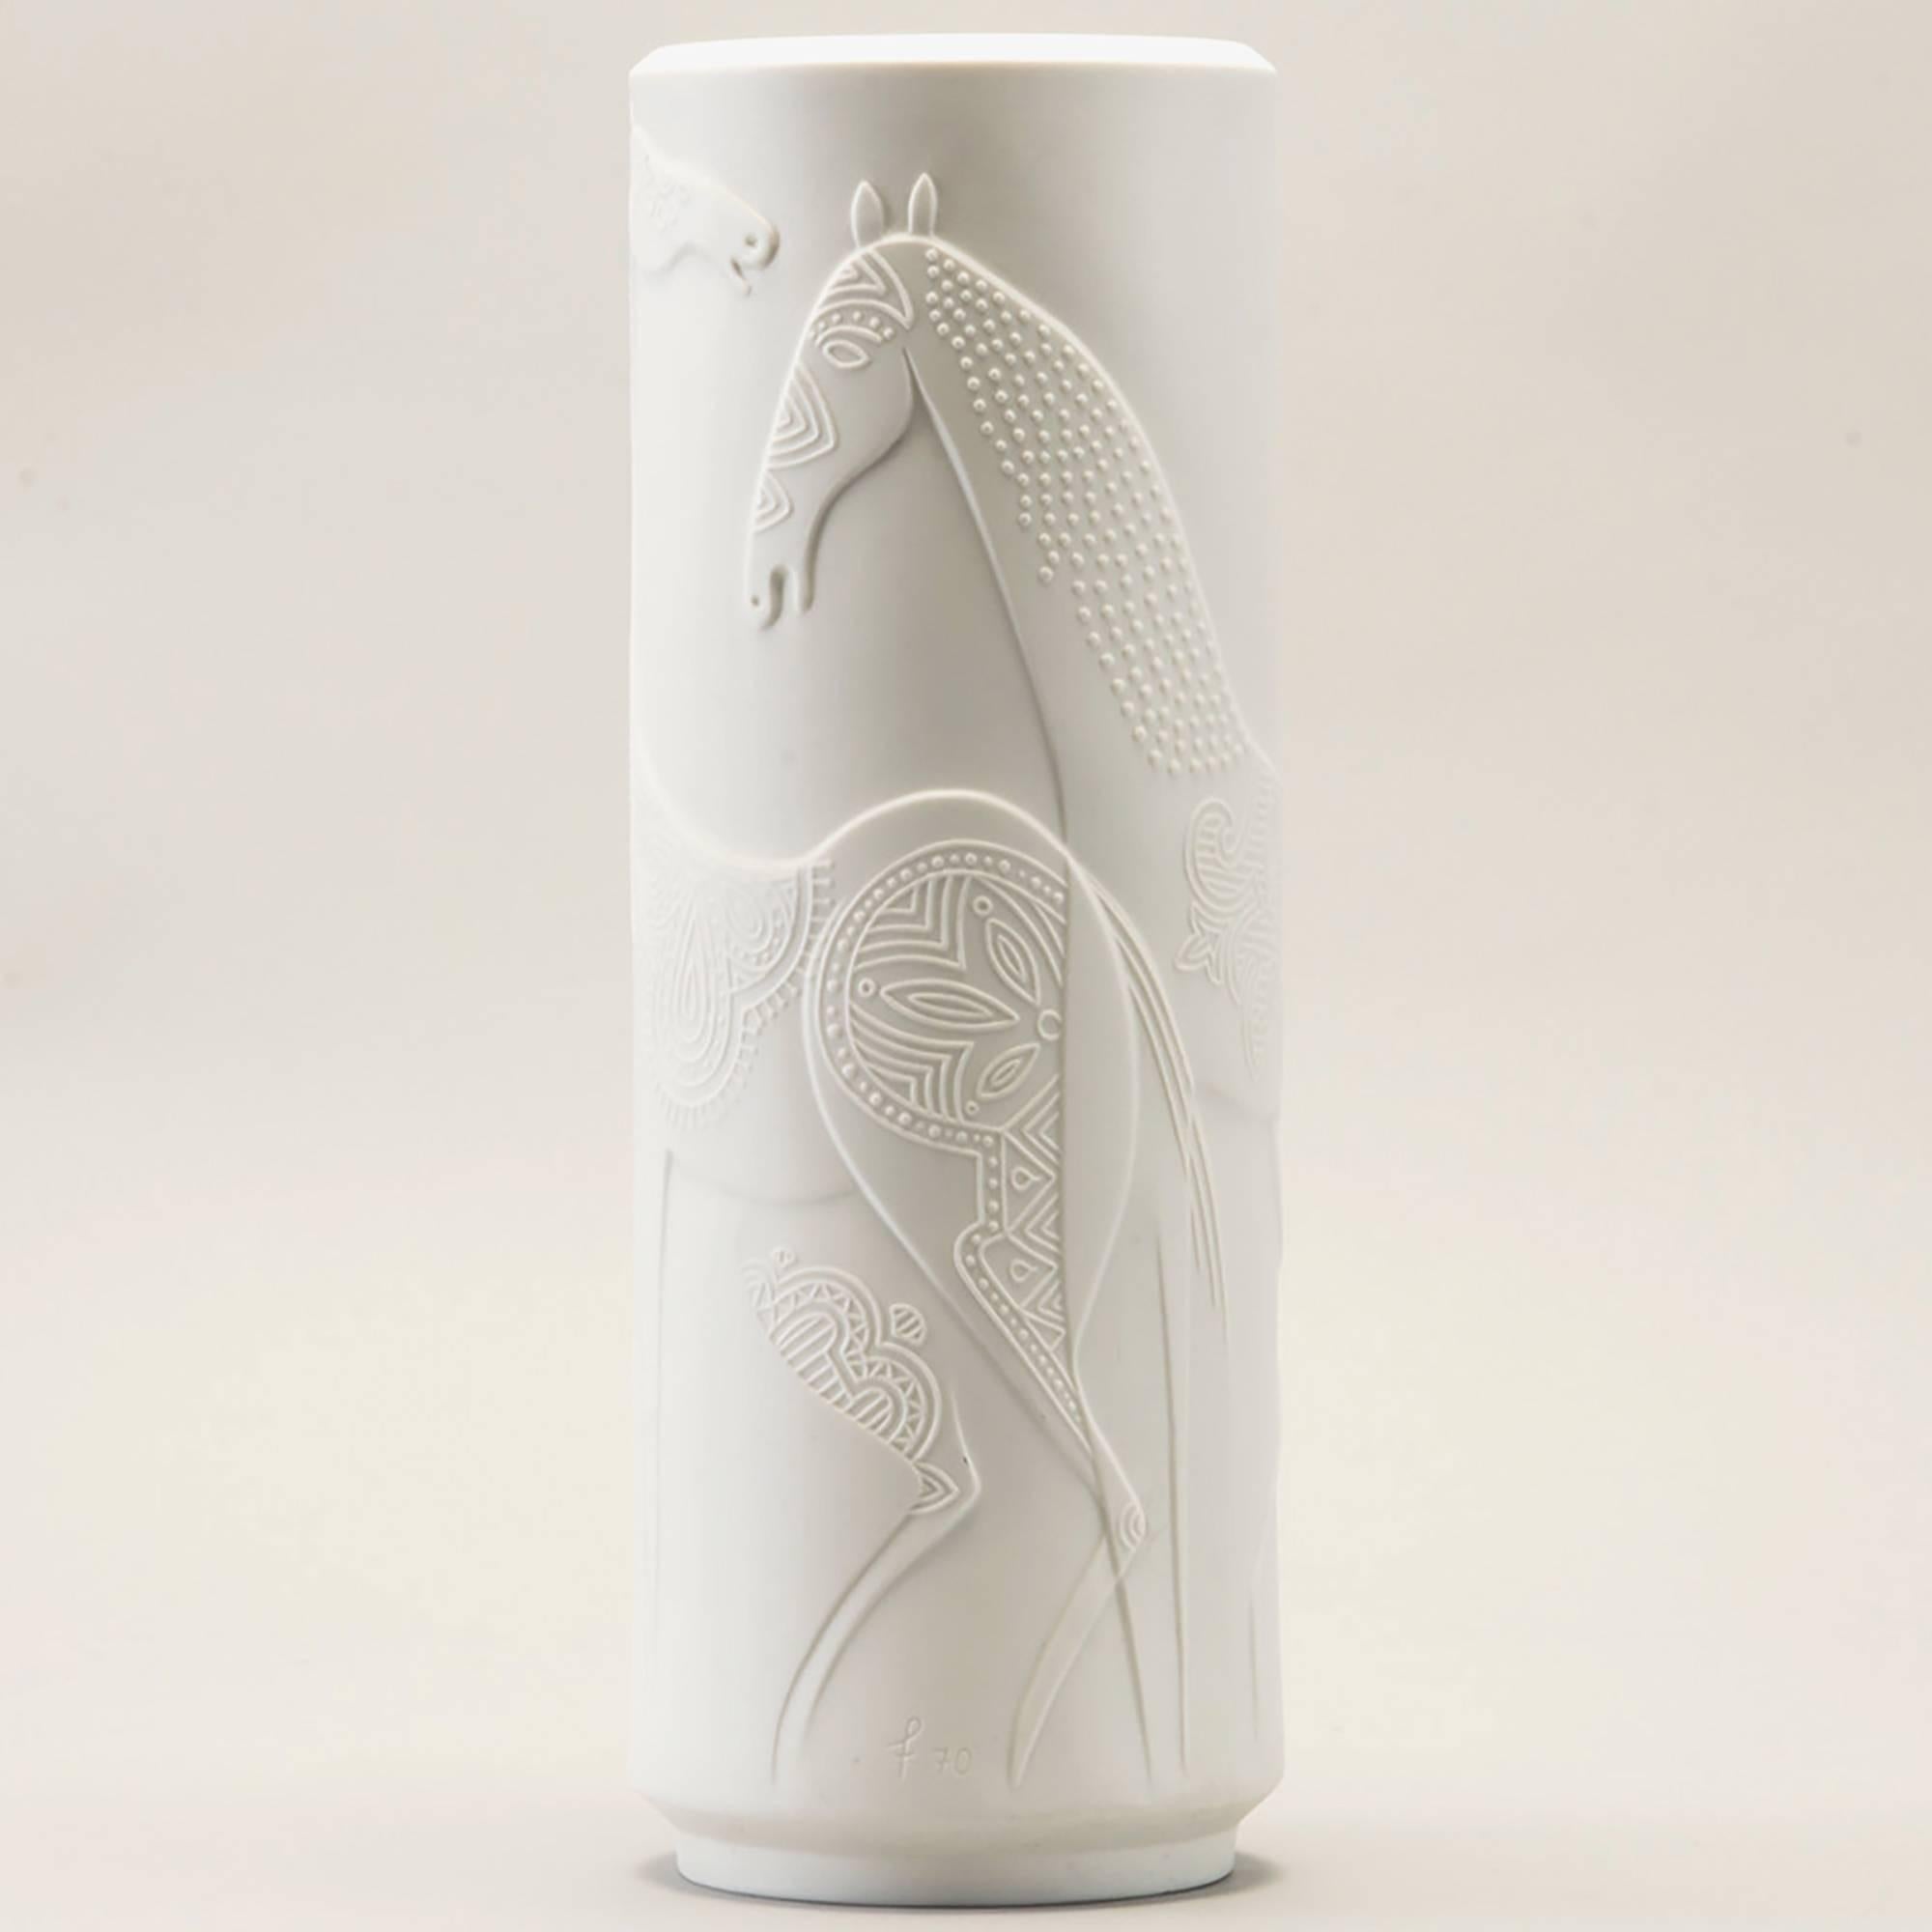 Circa 1970s tall white porcelain vase designed by Cuno Fischer for German maker Hutschenreuther with a design of stylized horses in relief. Round vase is over 13” tall and has matte finish outside and glazed interior. Marks include artist’s